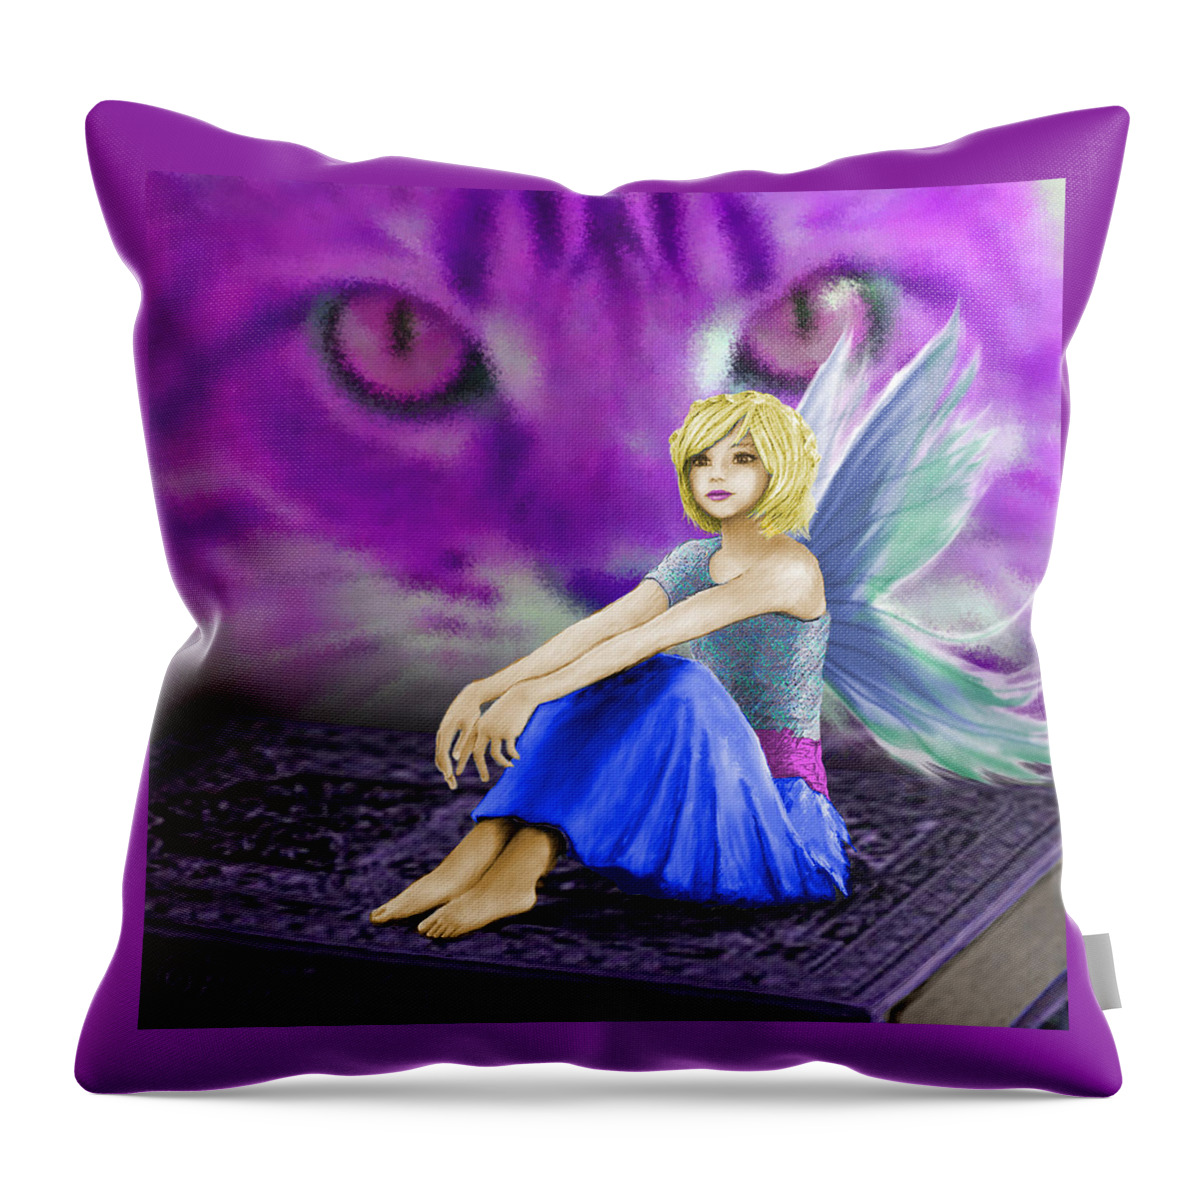 Cat Throw Pillow featuring the digital art Cat Observes Fairy by Yuichi Tanabe